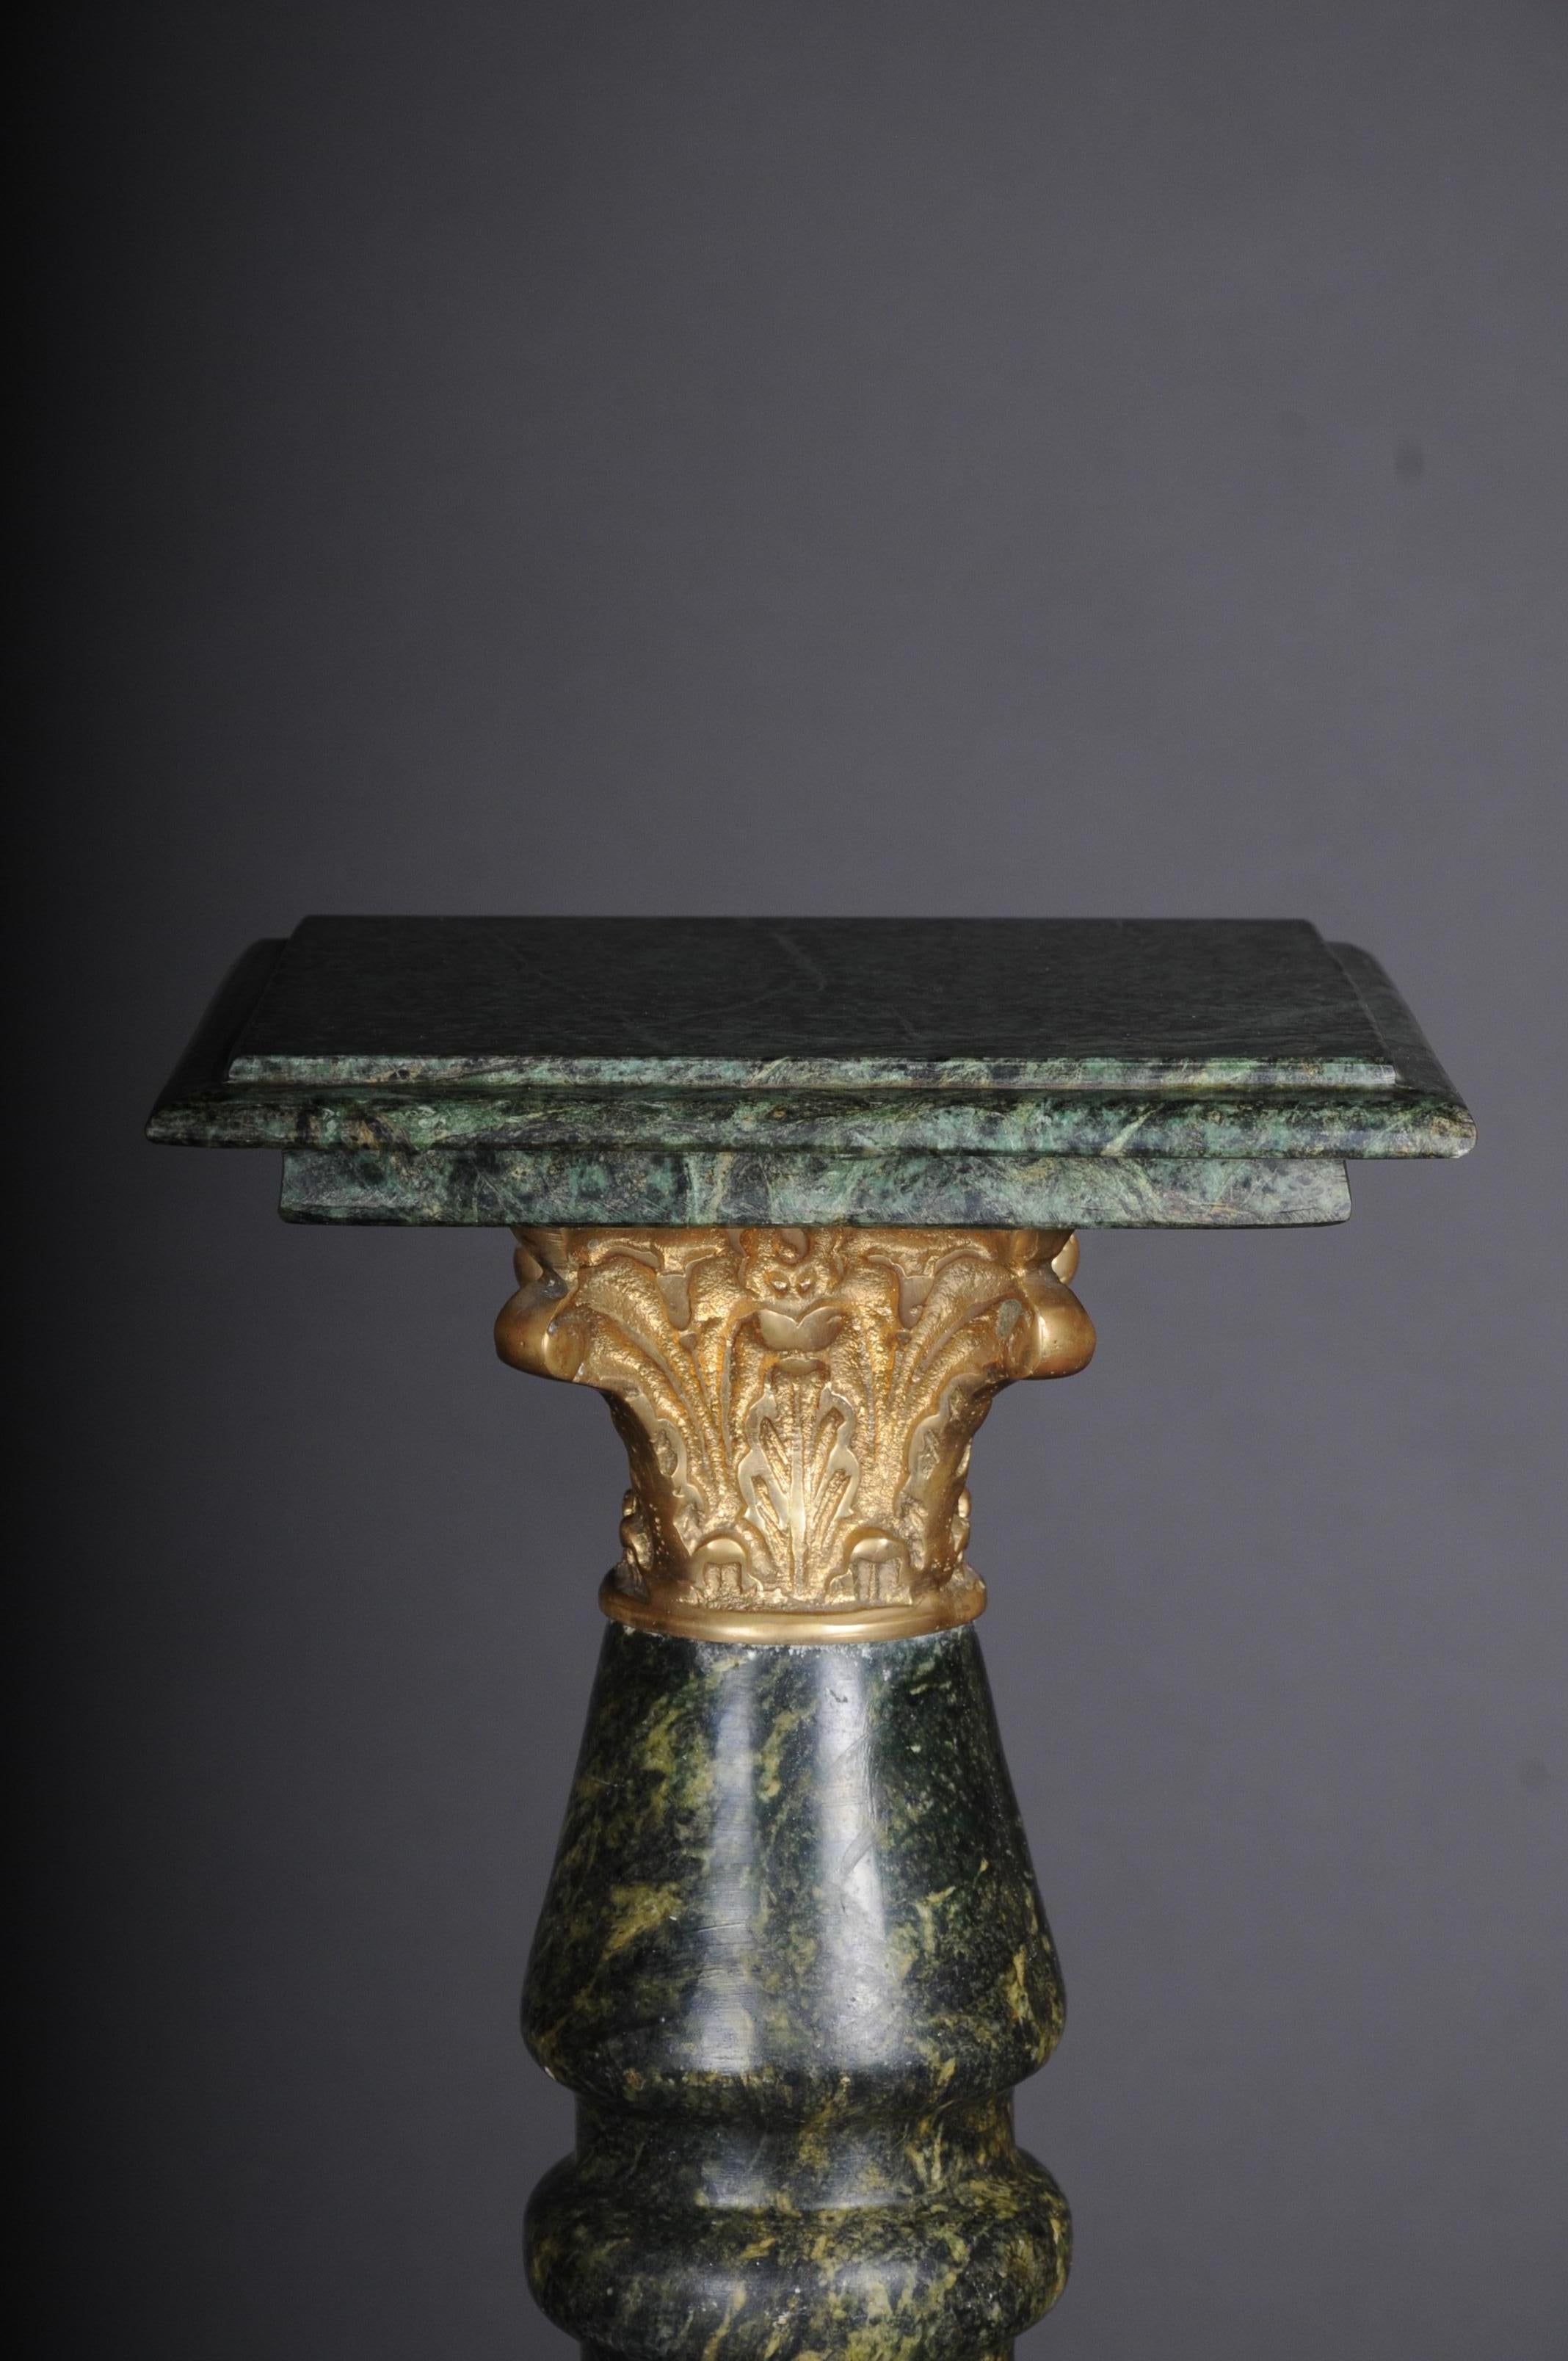 20th century Fancy marble column green with brass

Fancy marble column green with brass
Pedestal-shaped substructure, stepped and profiled. Column shaft turned. Unusual and decorative shape. Brass applications. Square profiled